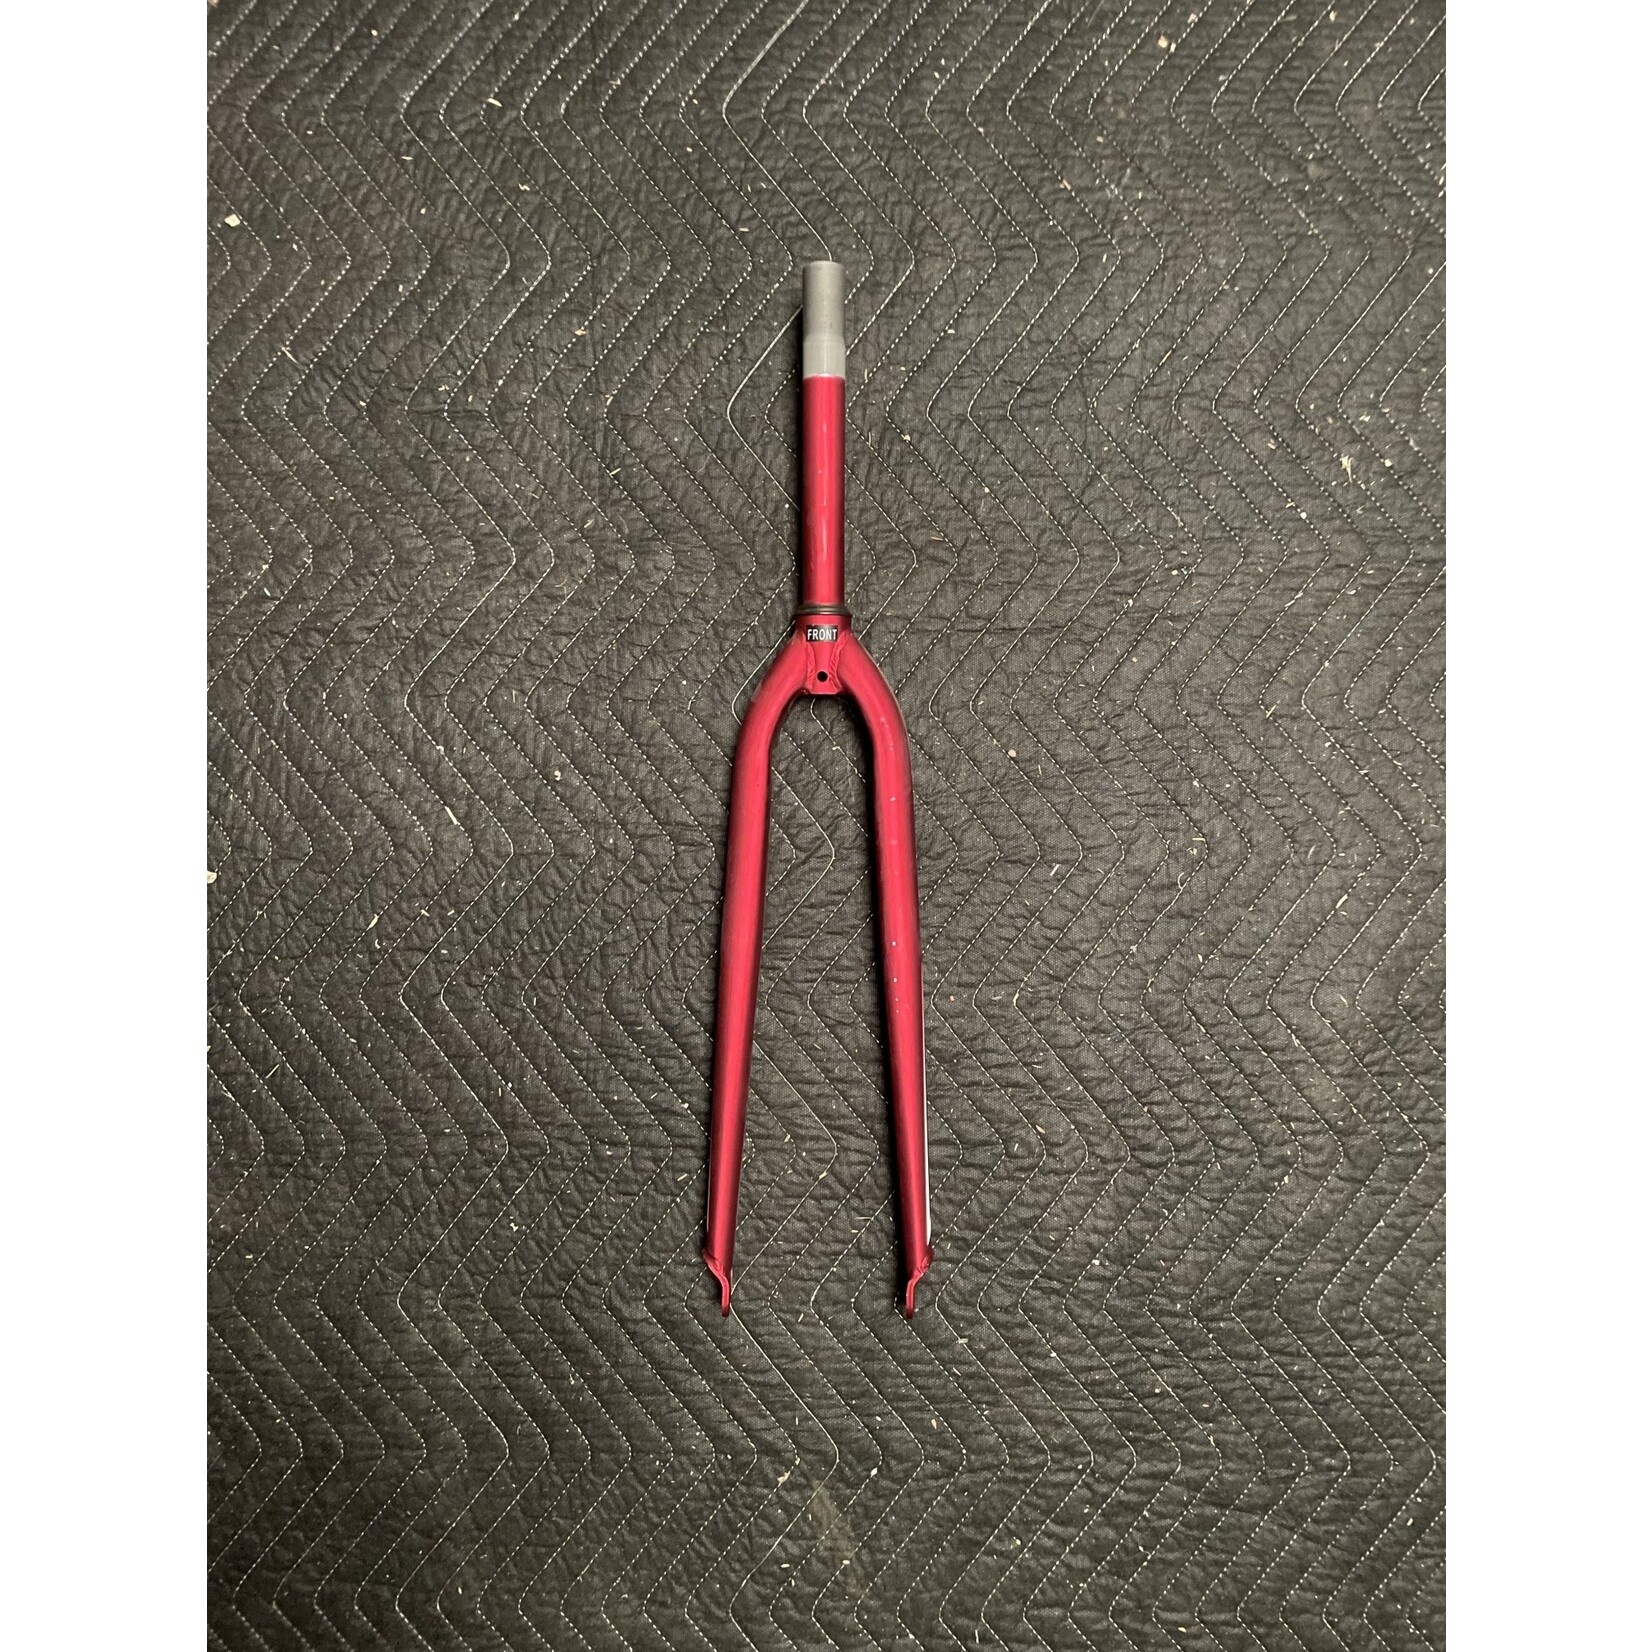 GMC 1” x 7 5/8” Threaded 700C Hybrid Bicycle Fork (Red)